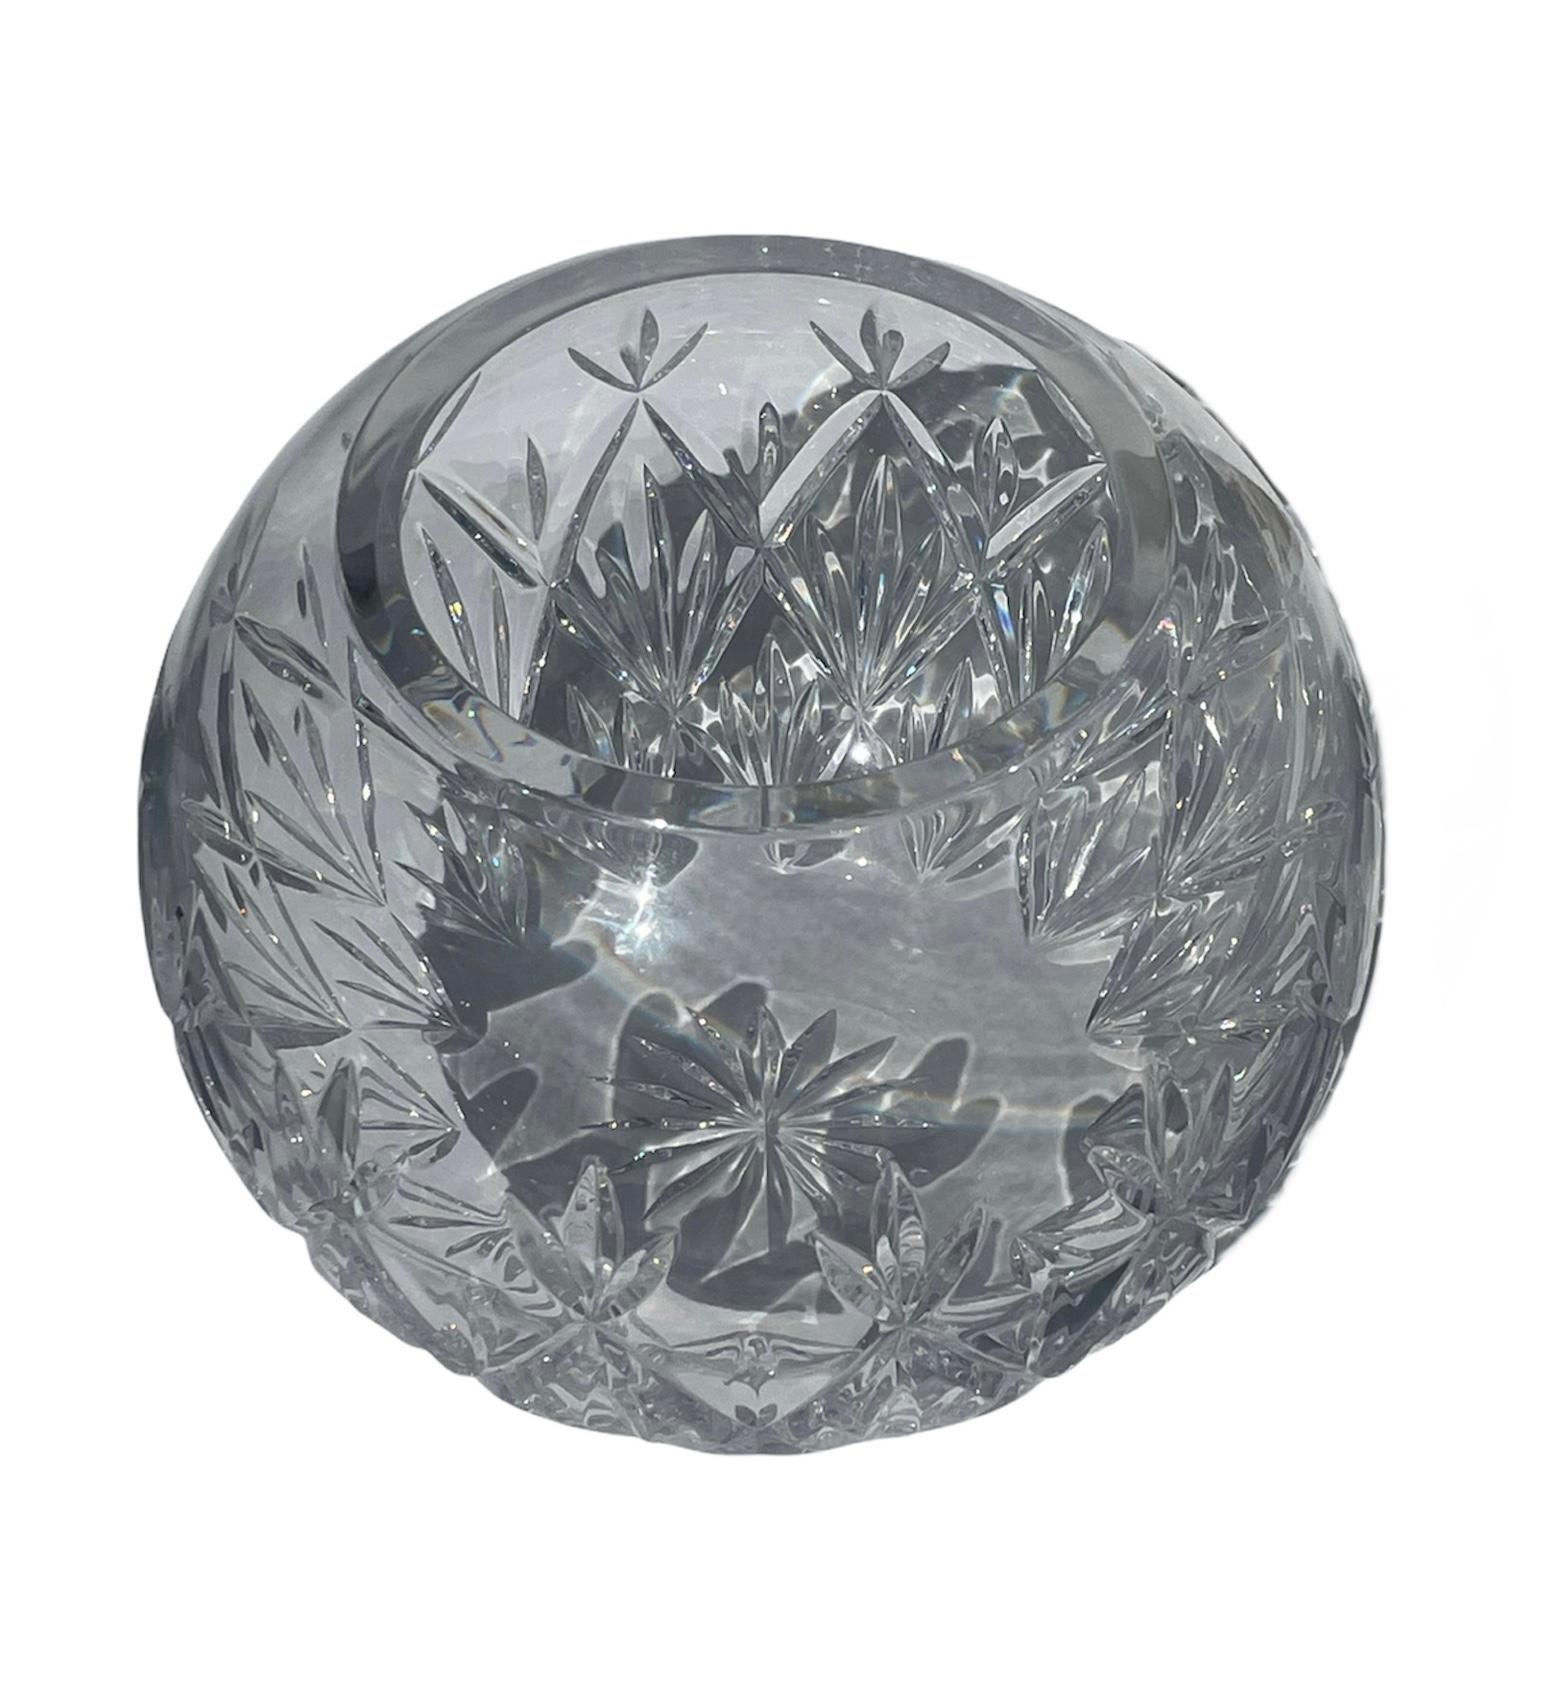 This is a Tiffany & Co. cut clear crystal round bowl vase. It depicts multiple diamonds and kind of Fleur de lis patterns around it. In the crystal surface of the center of the base, there is a starburst. Below the vase, it is the acid etched